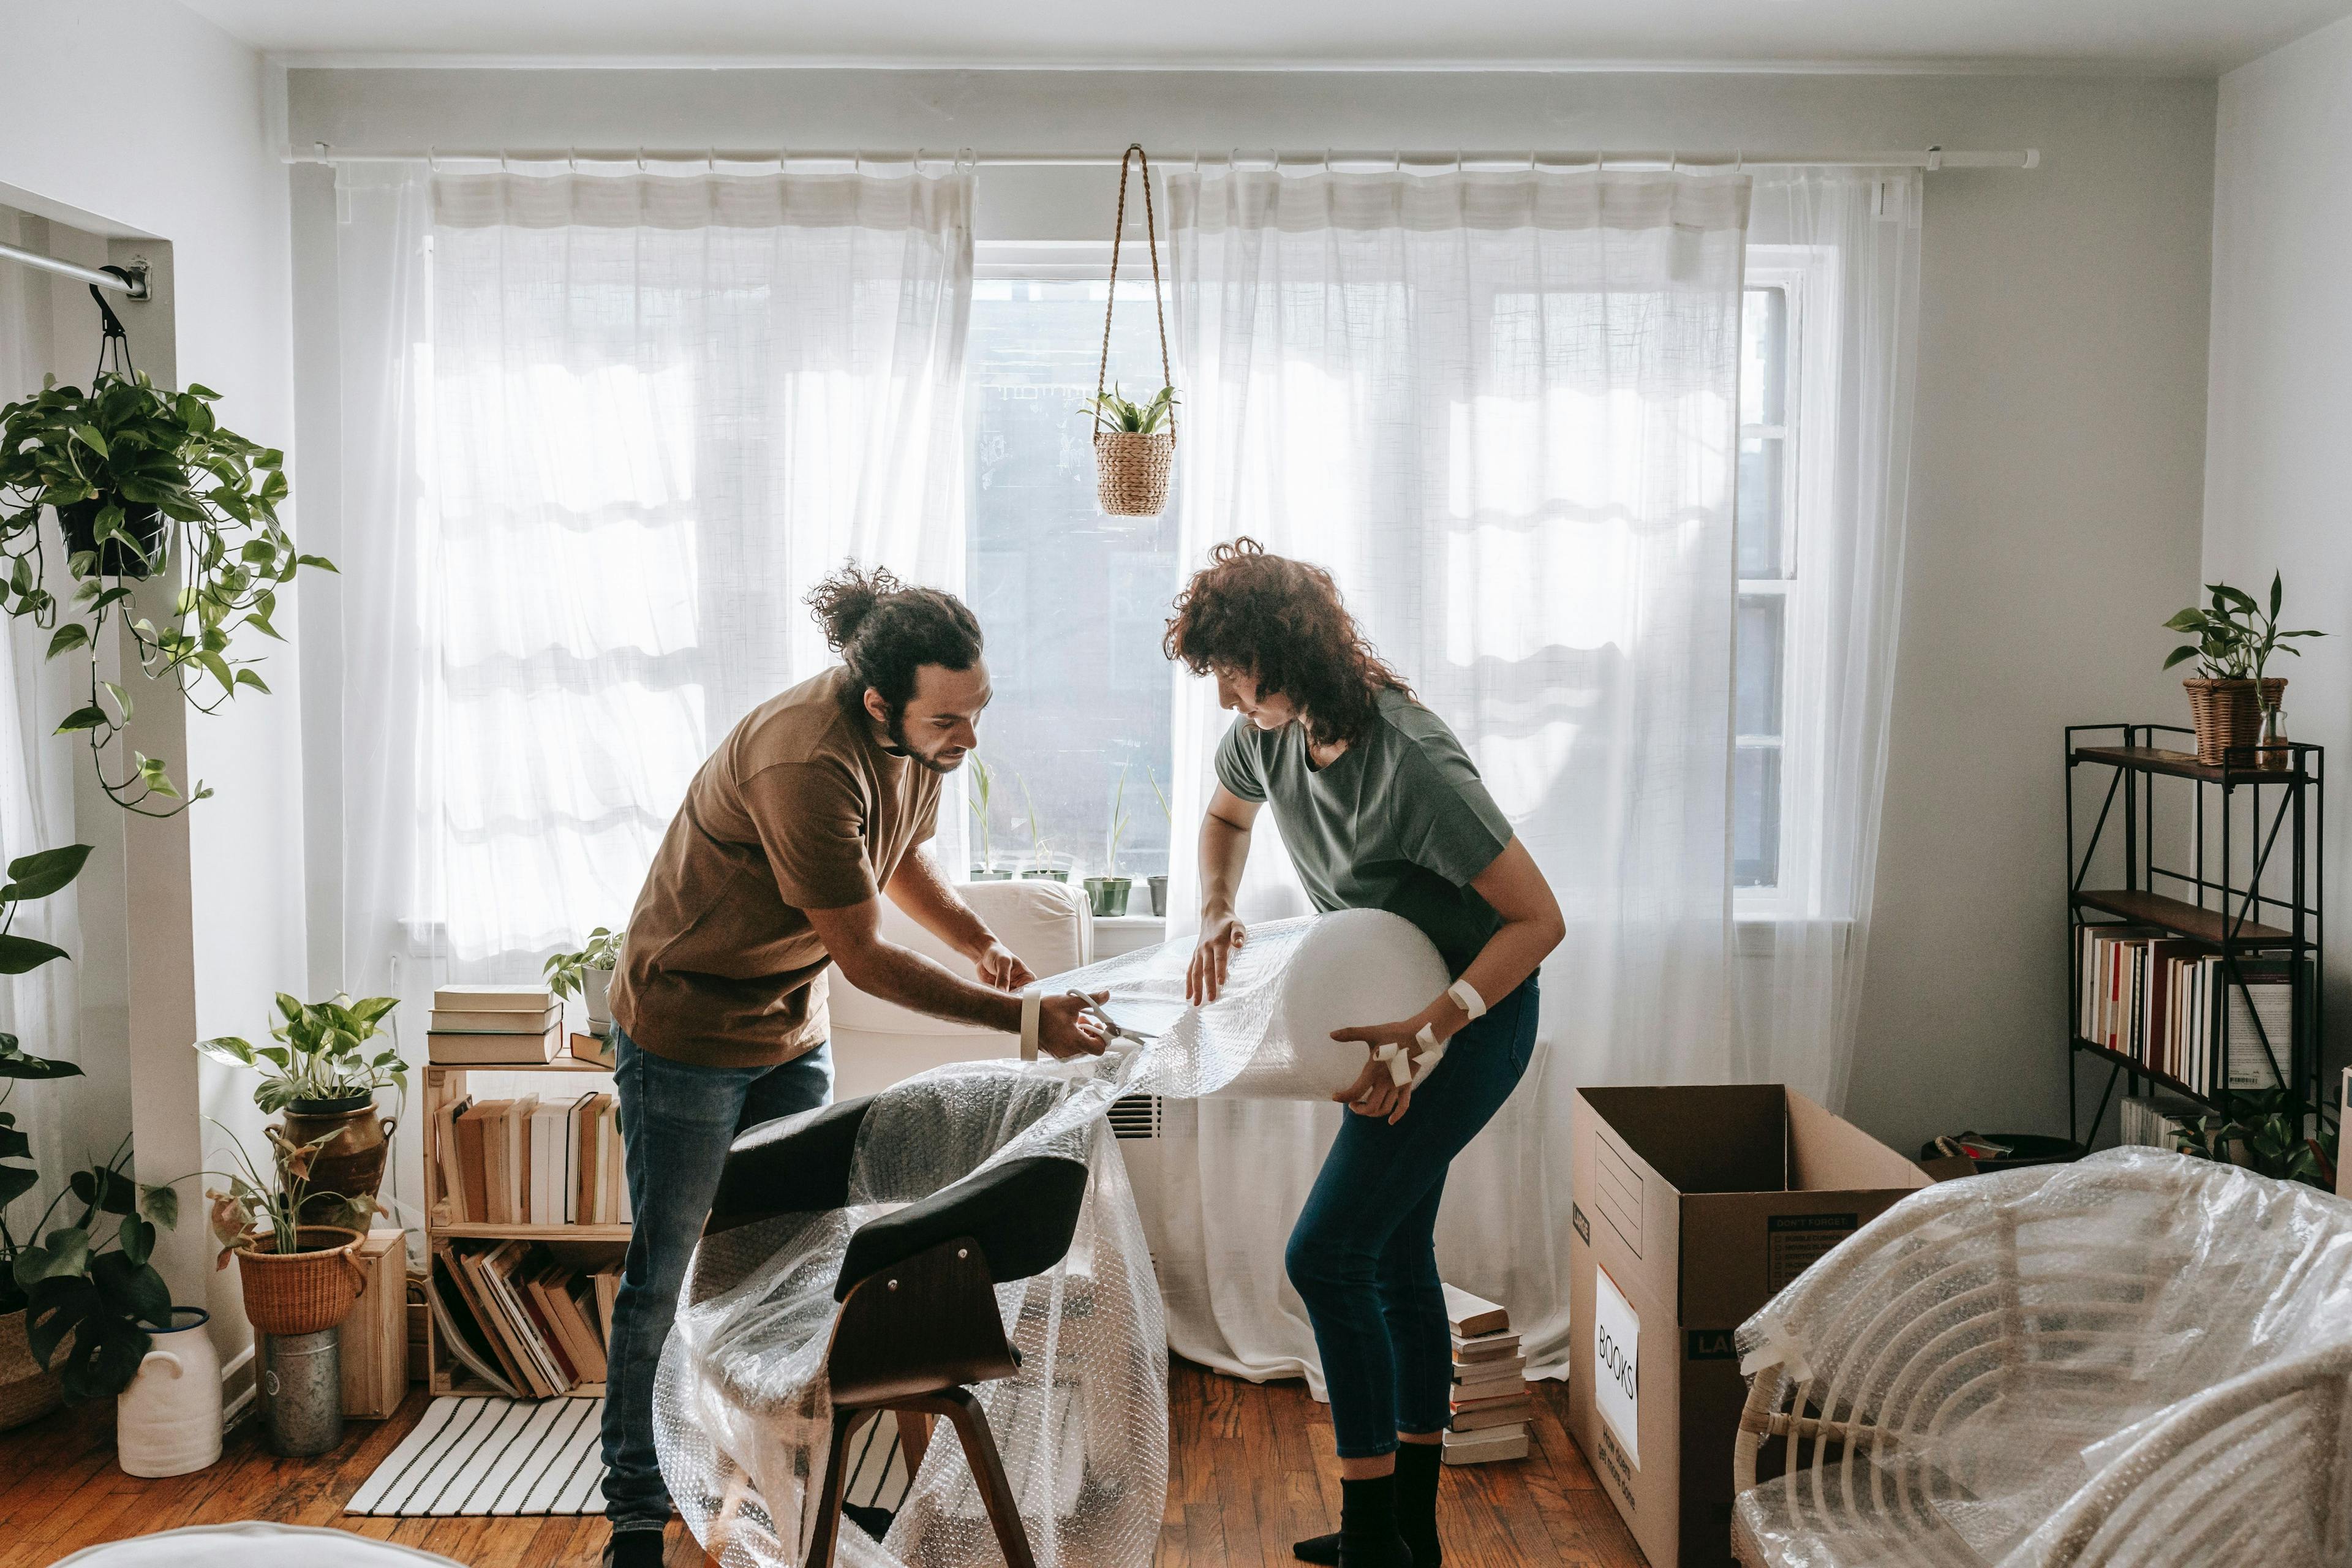 Two persons wrapping a chair in bubble wrap in a cosy messy room.